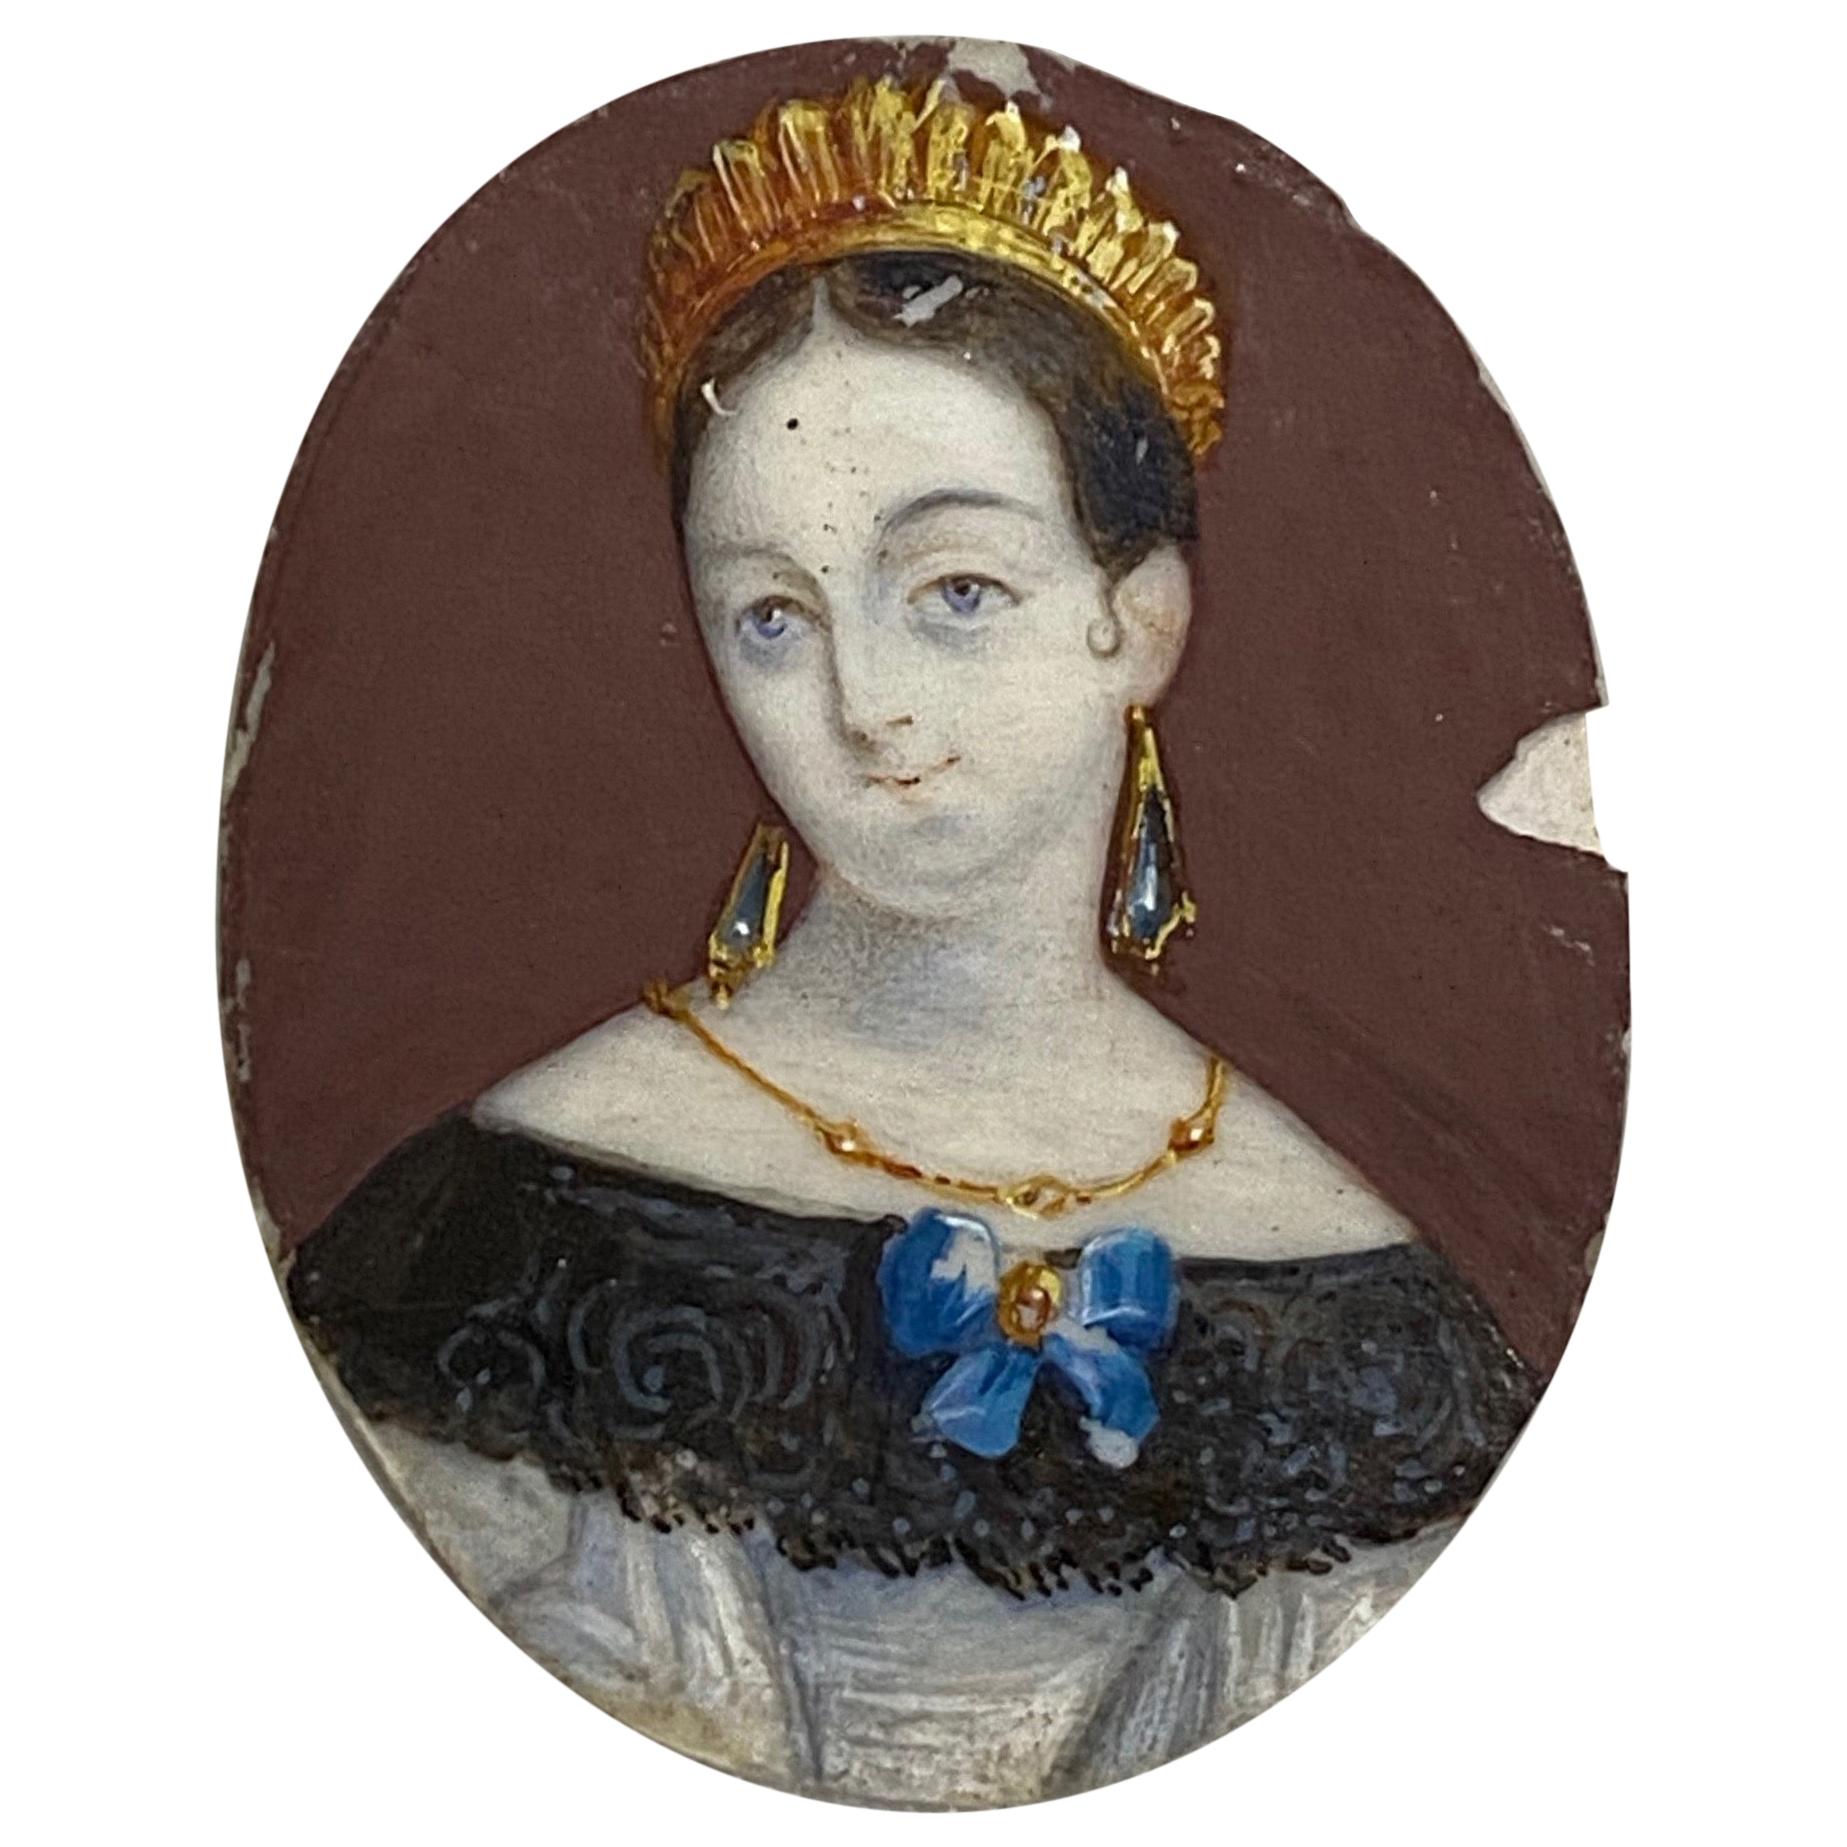 Russian Princess with Tiara and Elaborate Jewelry Portrait Miniature For Sale